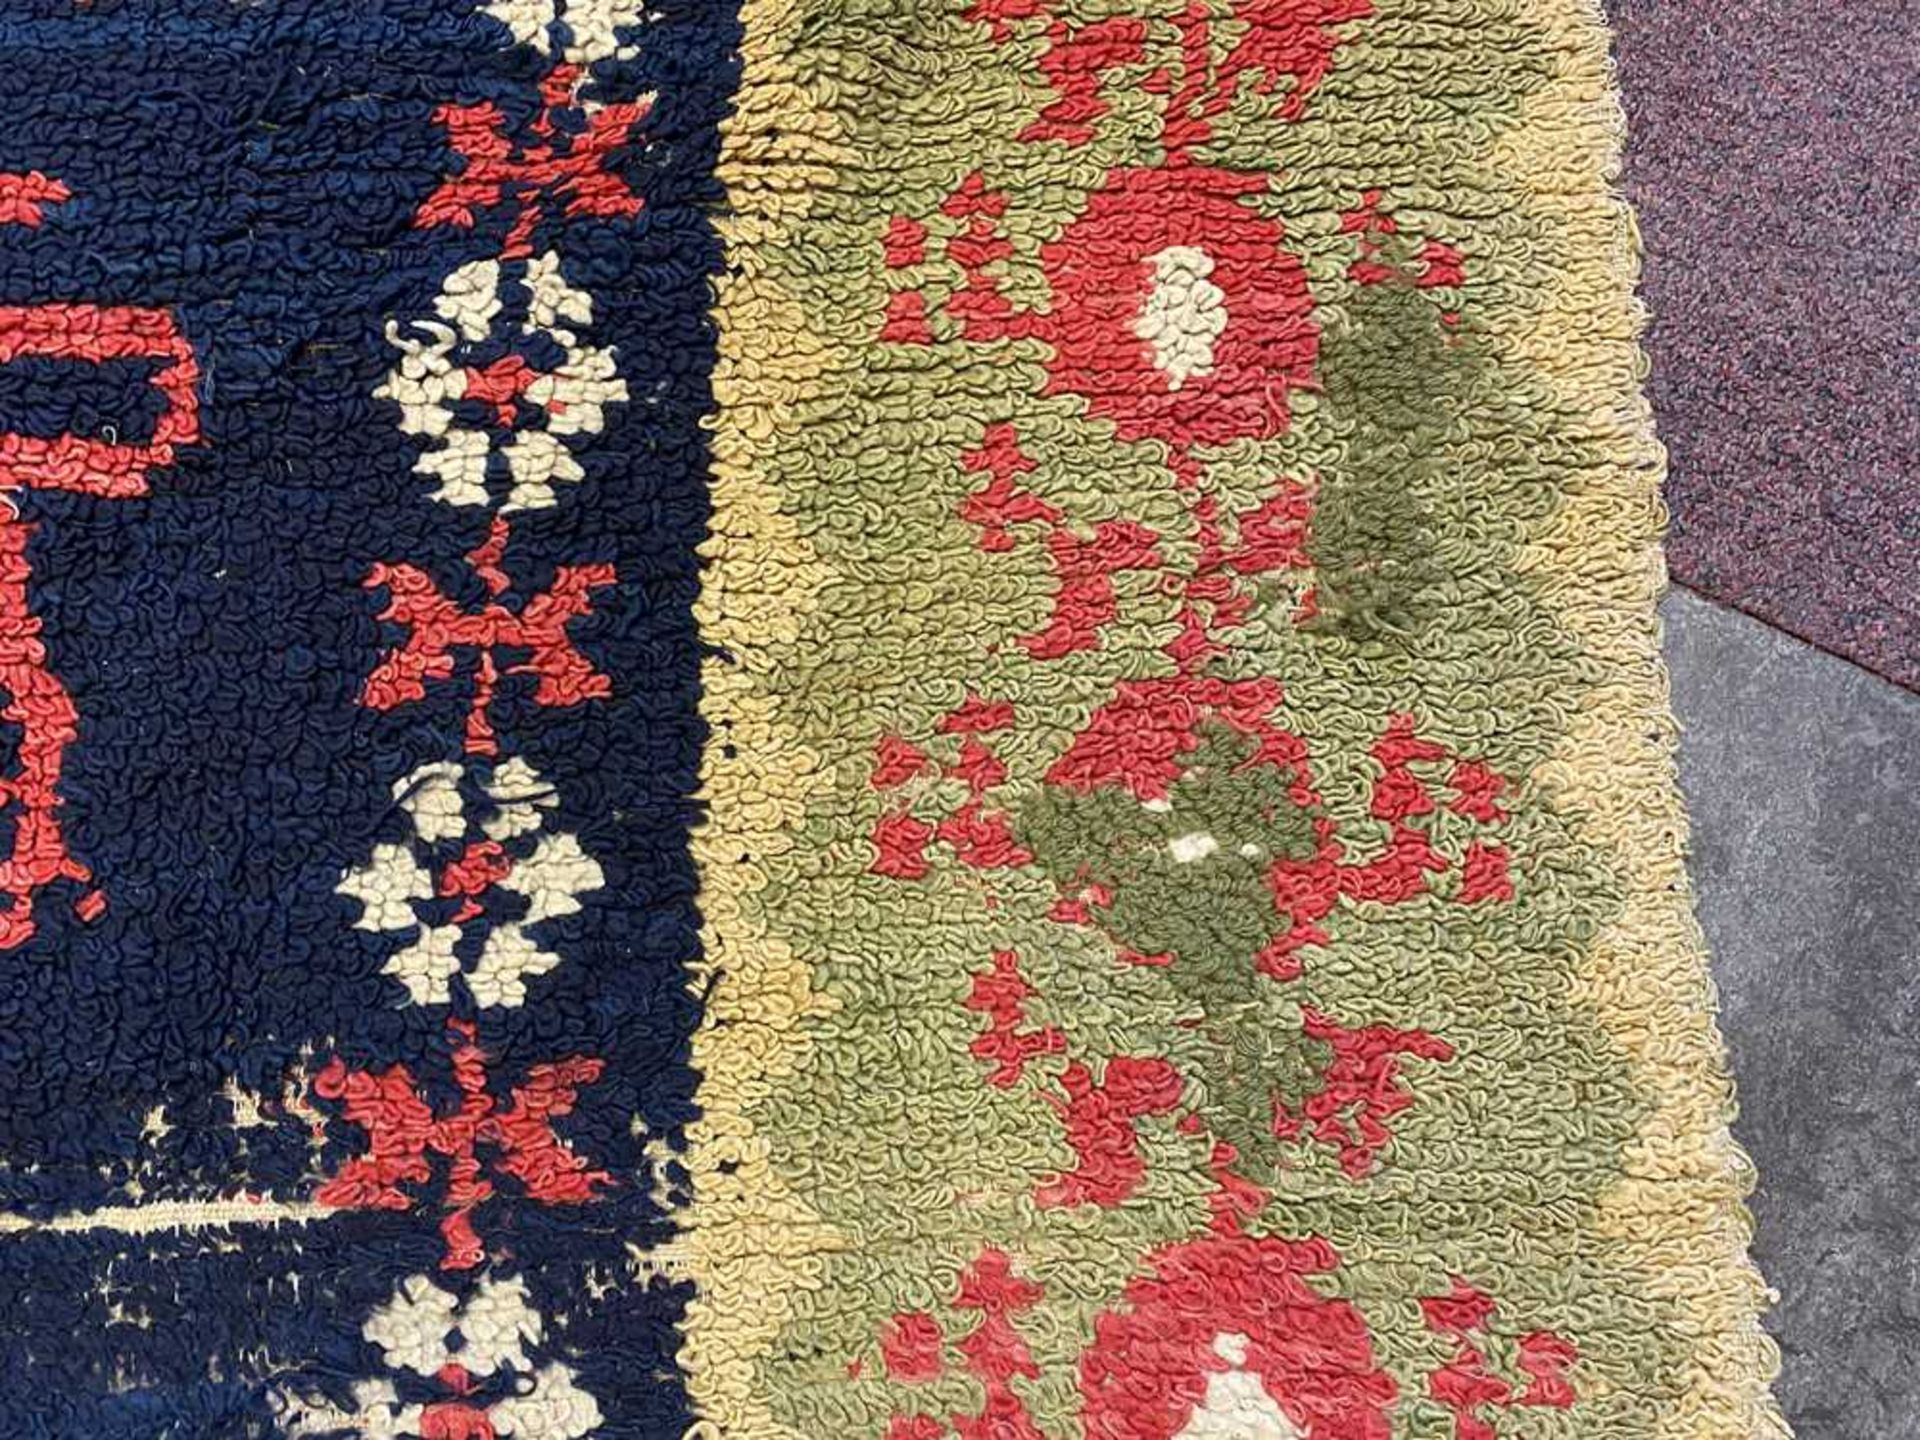 ALPUJARRA CARPET SOUTH SPAIN, LATE 18TH/EARLY 19TH CENTURY - Image 11 of 11